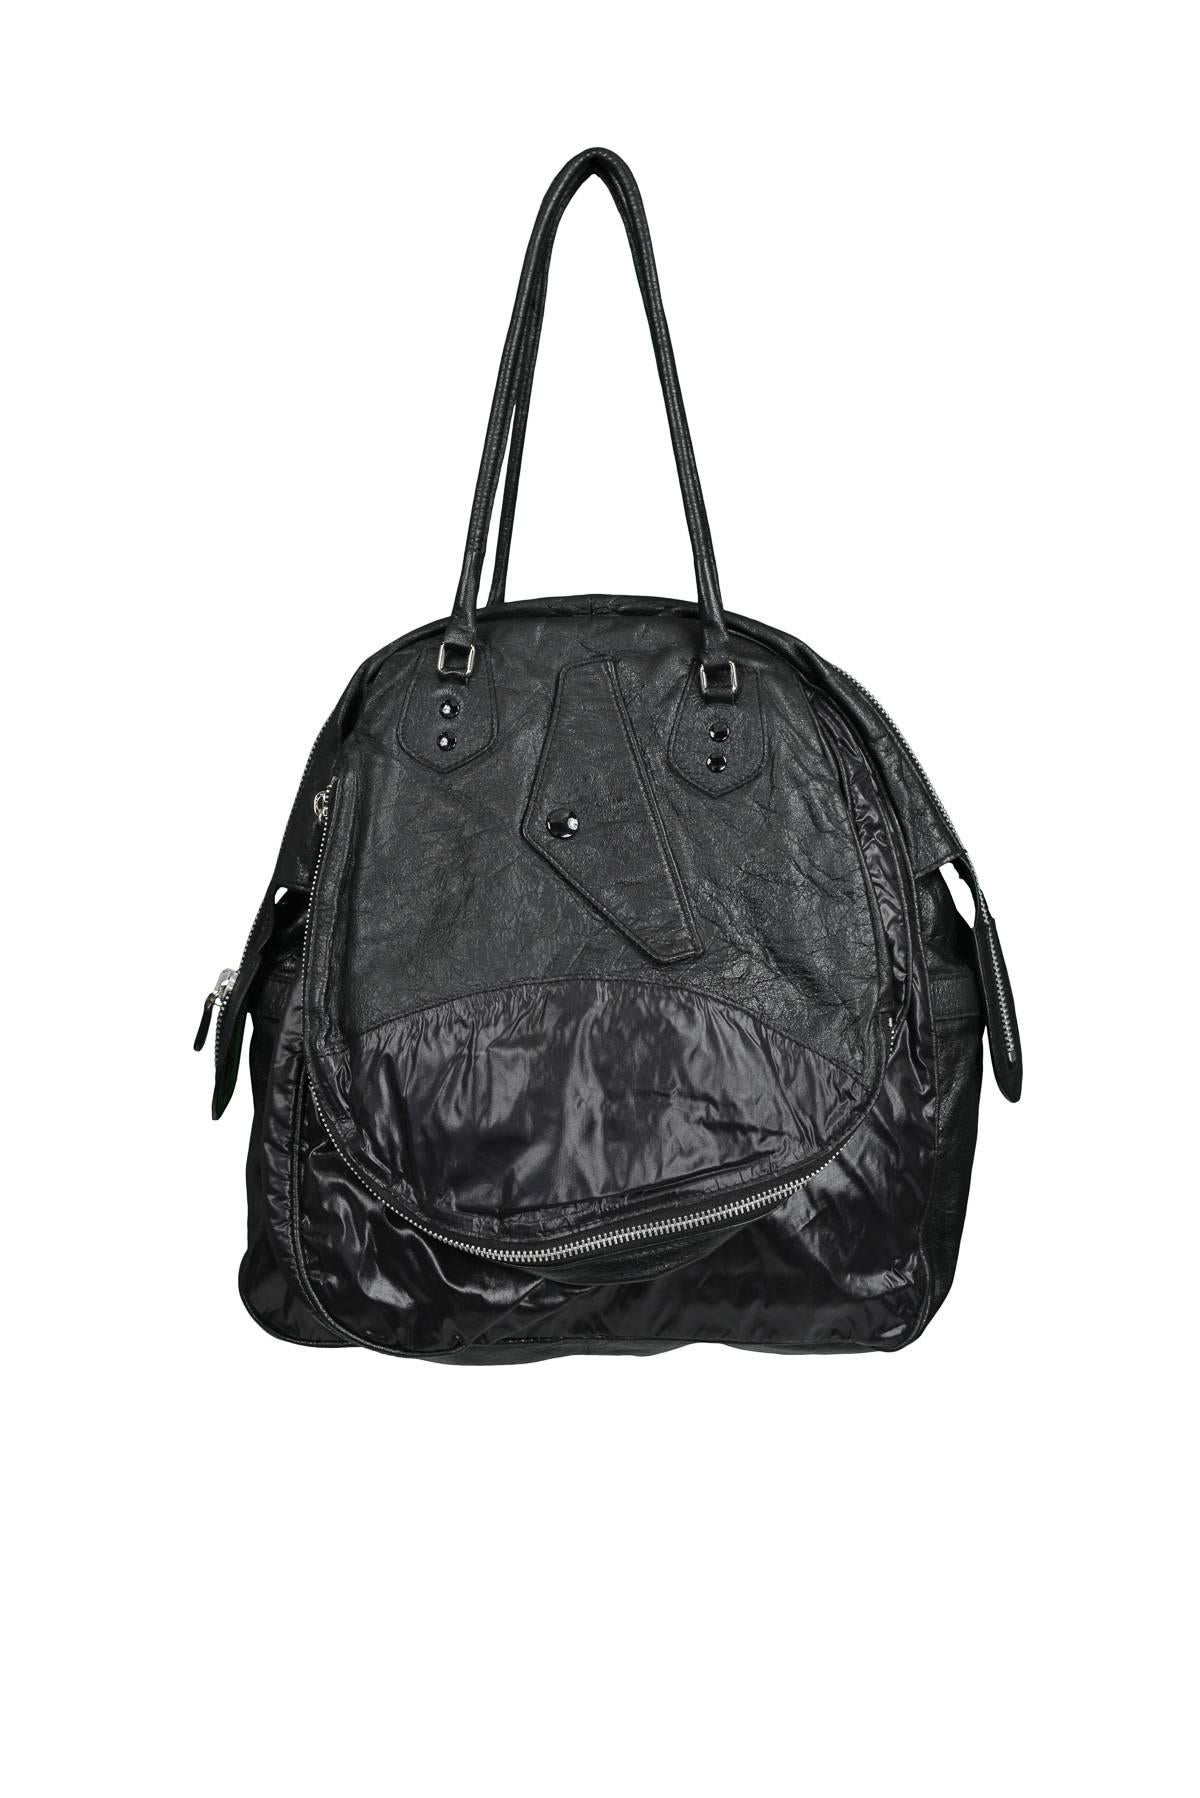 Balenciaga by Nicolas Ghesquiere black on black parachute collection bag with leather and nylon insets. Collection 2003. 

Excellent Condition.
